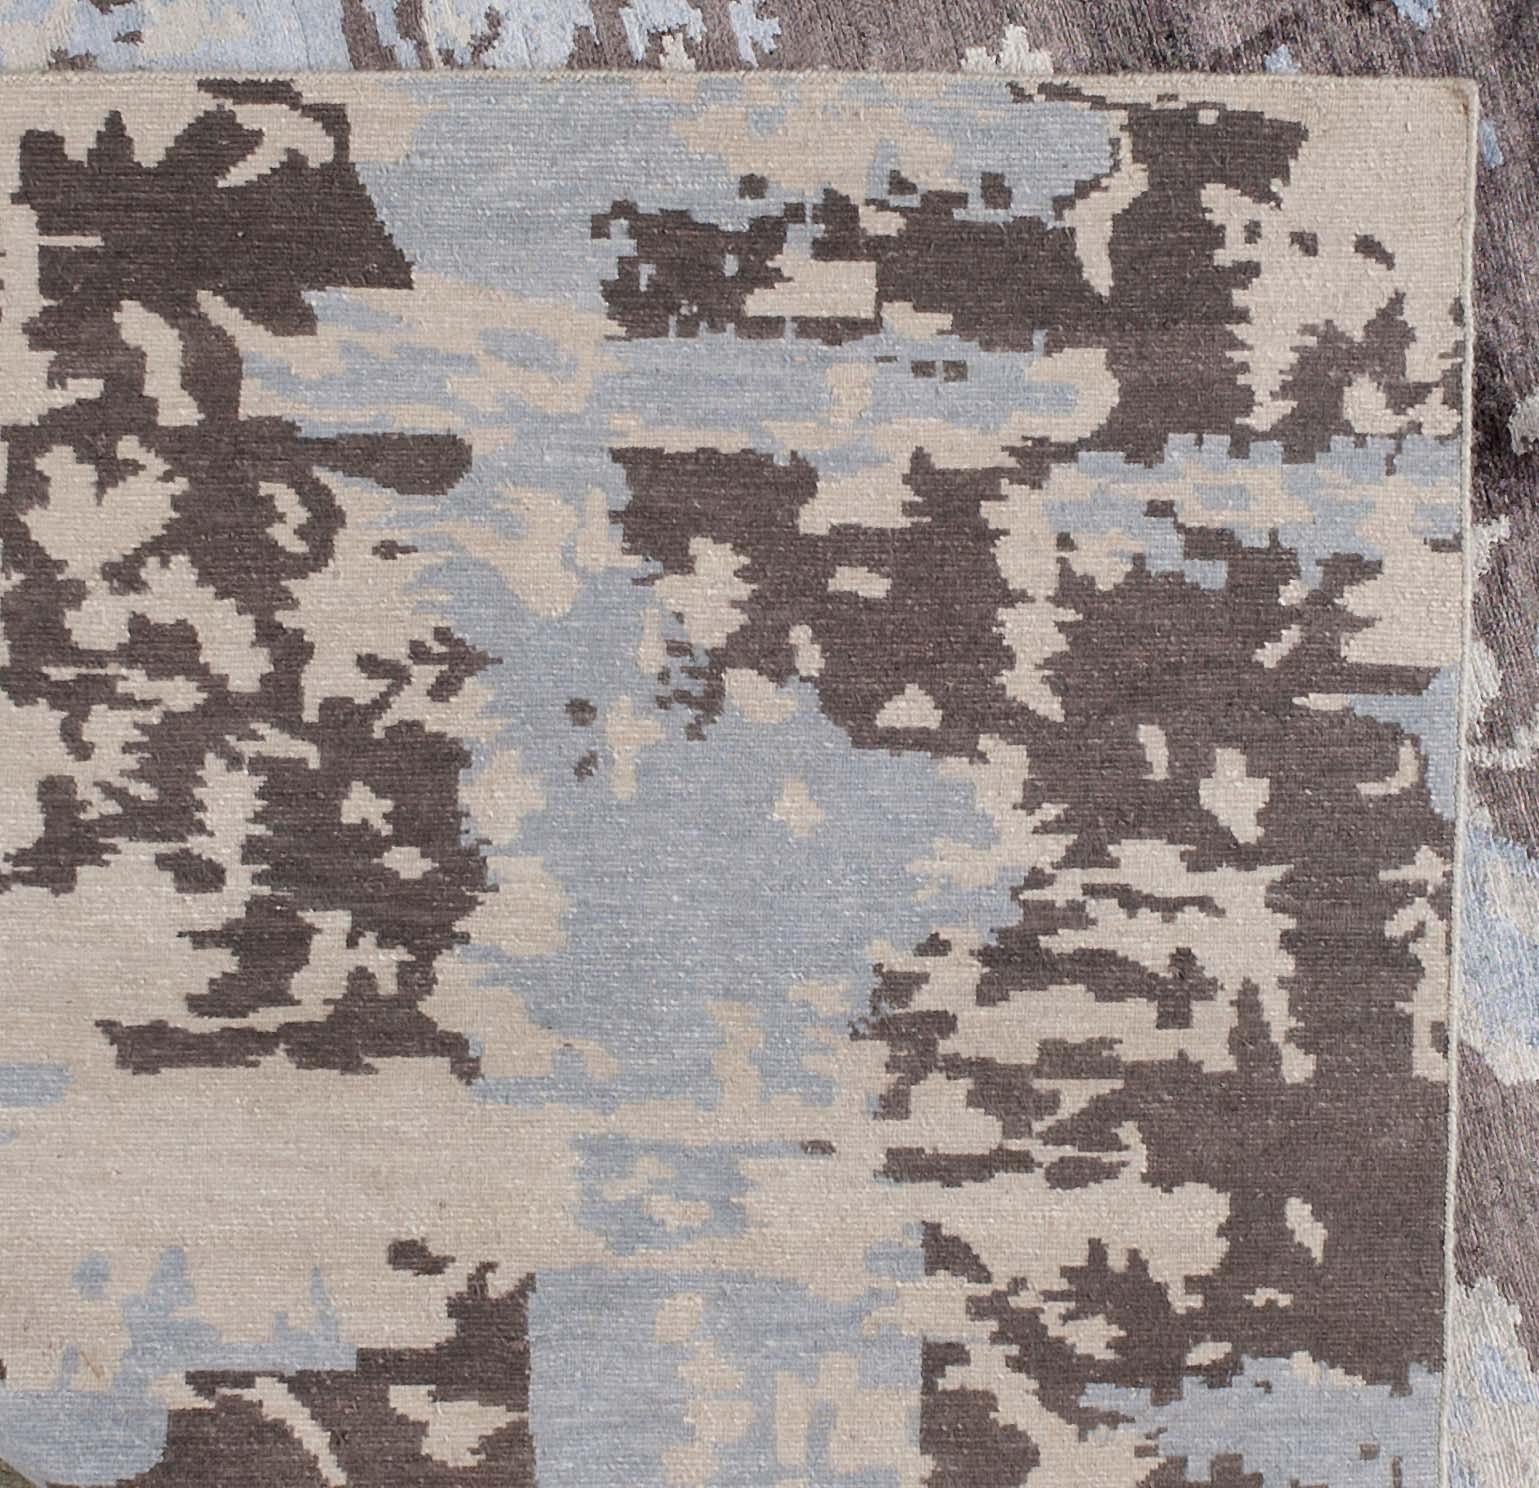 A very modern abstract mix of silver/gray, beige and taupe make for a very versatile rug, well-suited for a wide range of design styles. Hand knotted in India.